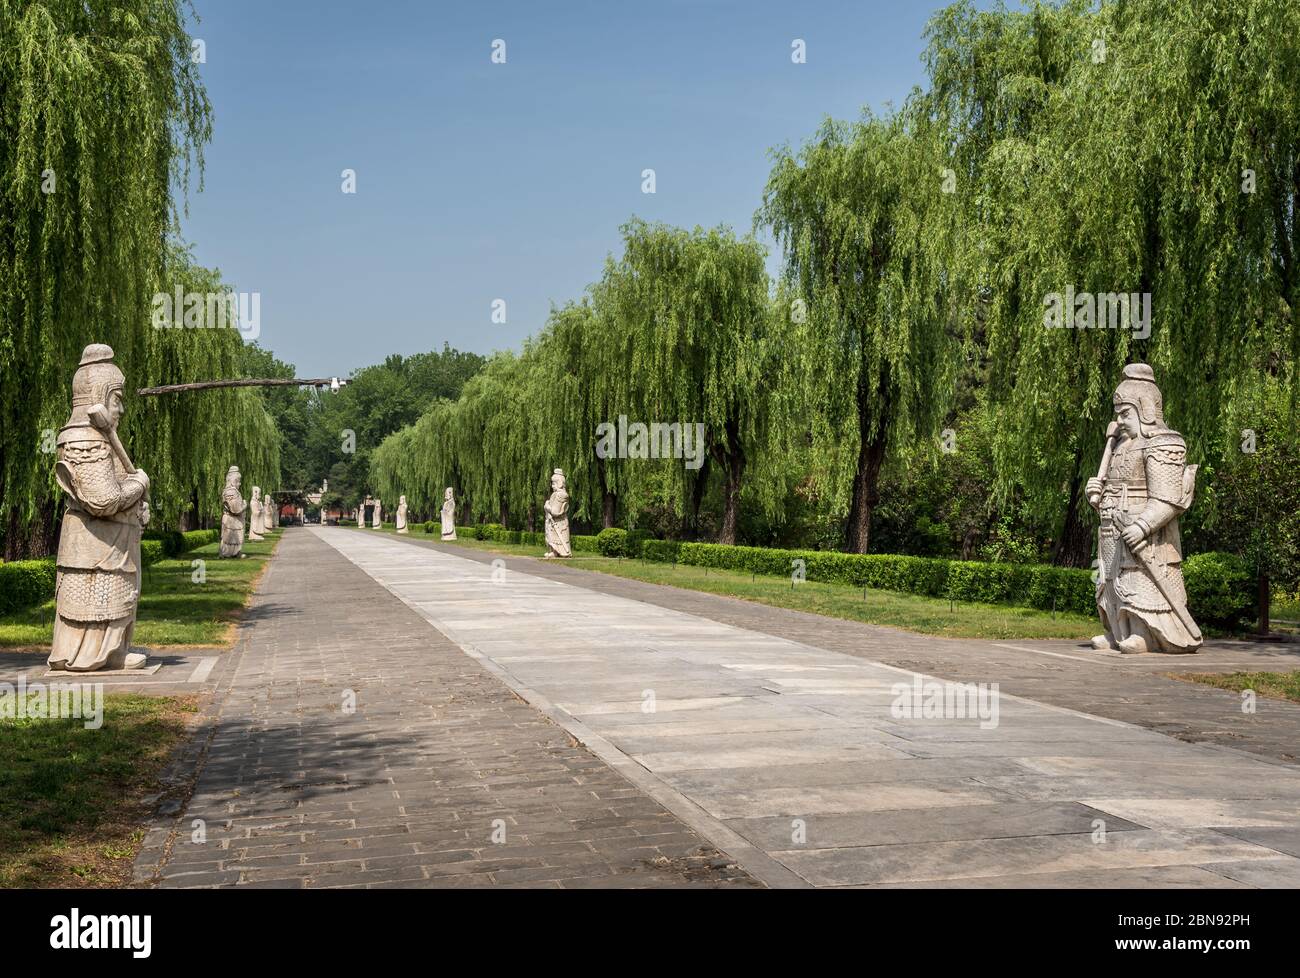 Statues of Generals, Sacred Way, Ming Tombs, Near Beijing Stock Photo